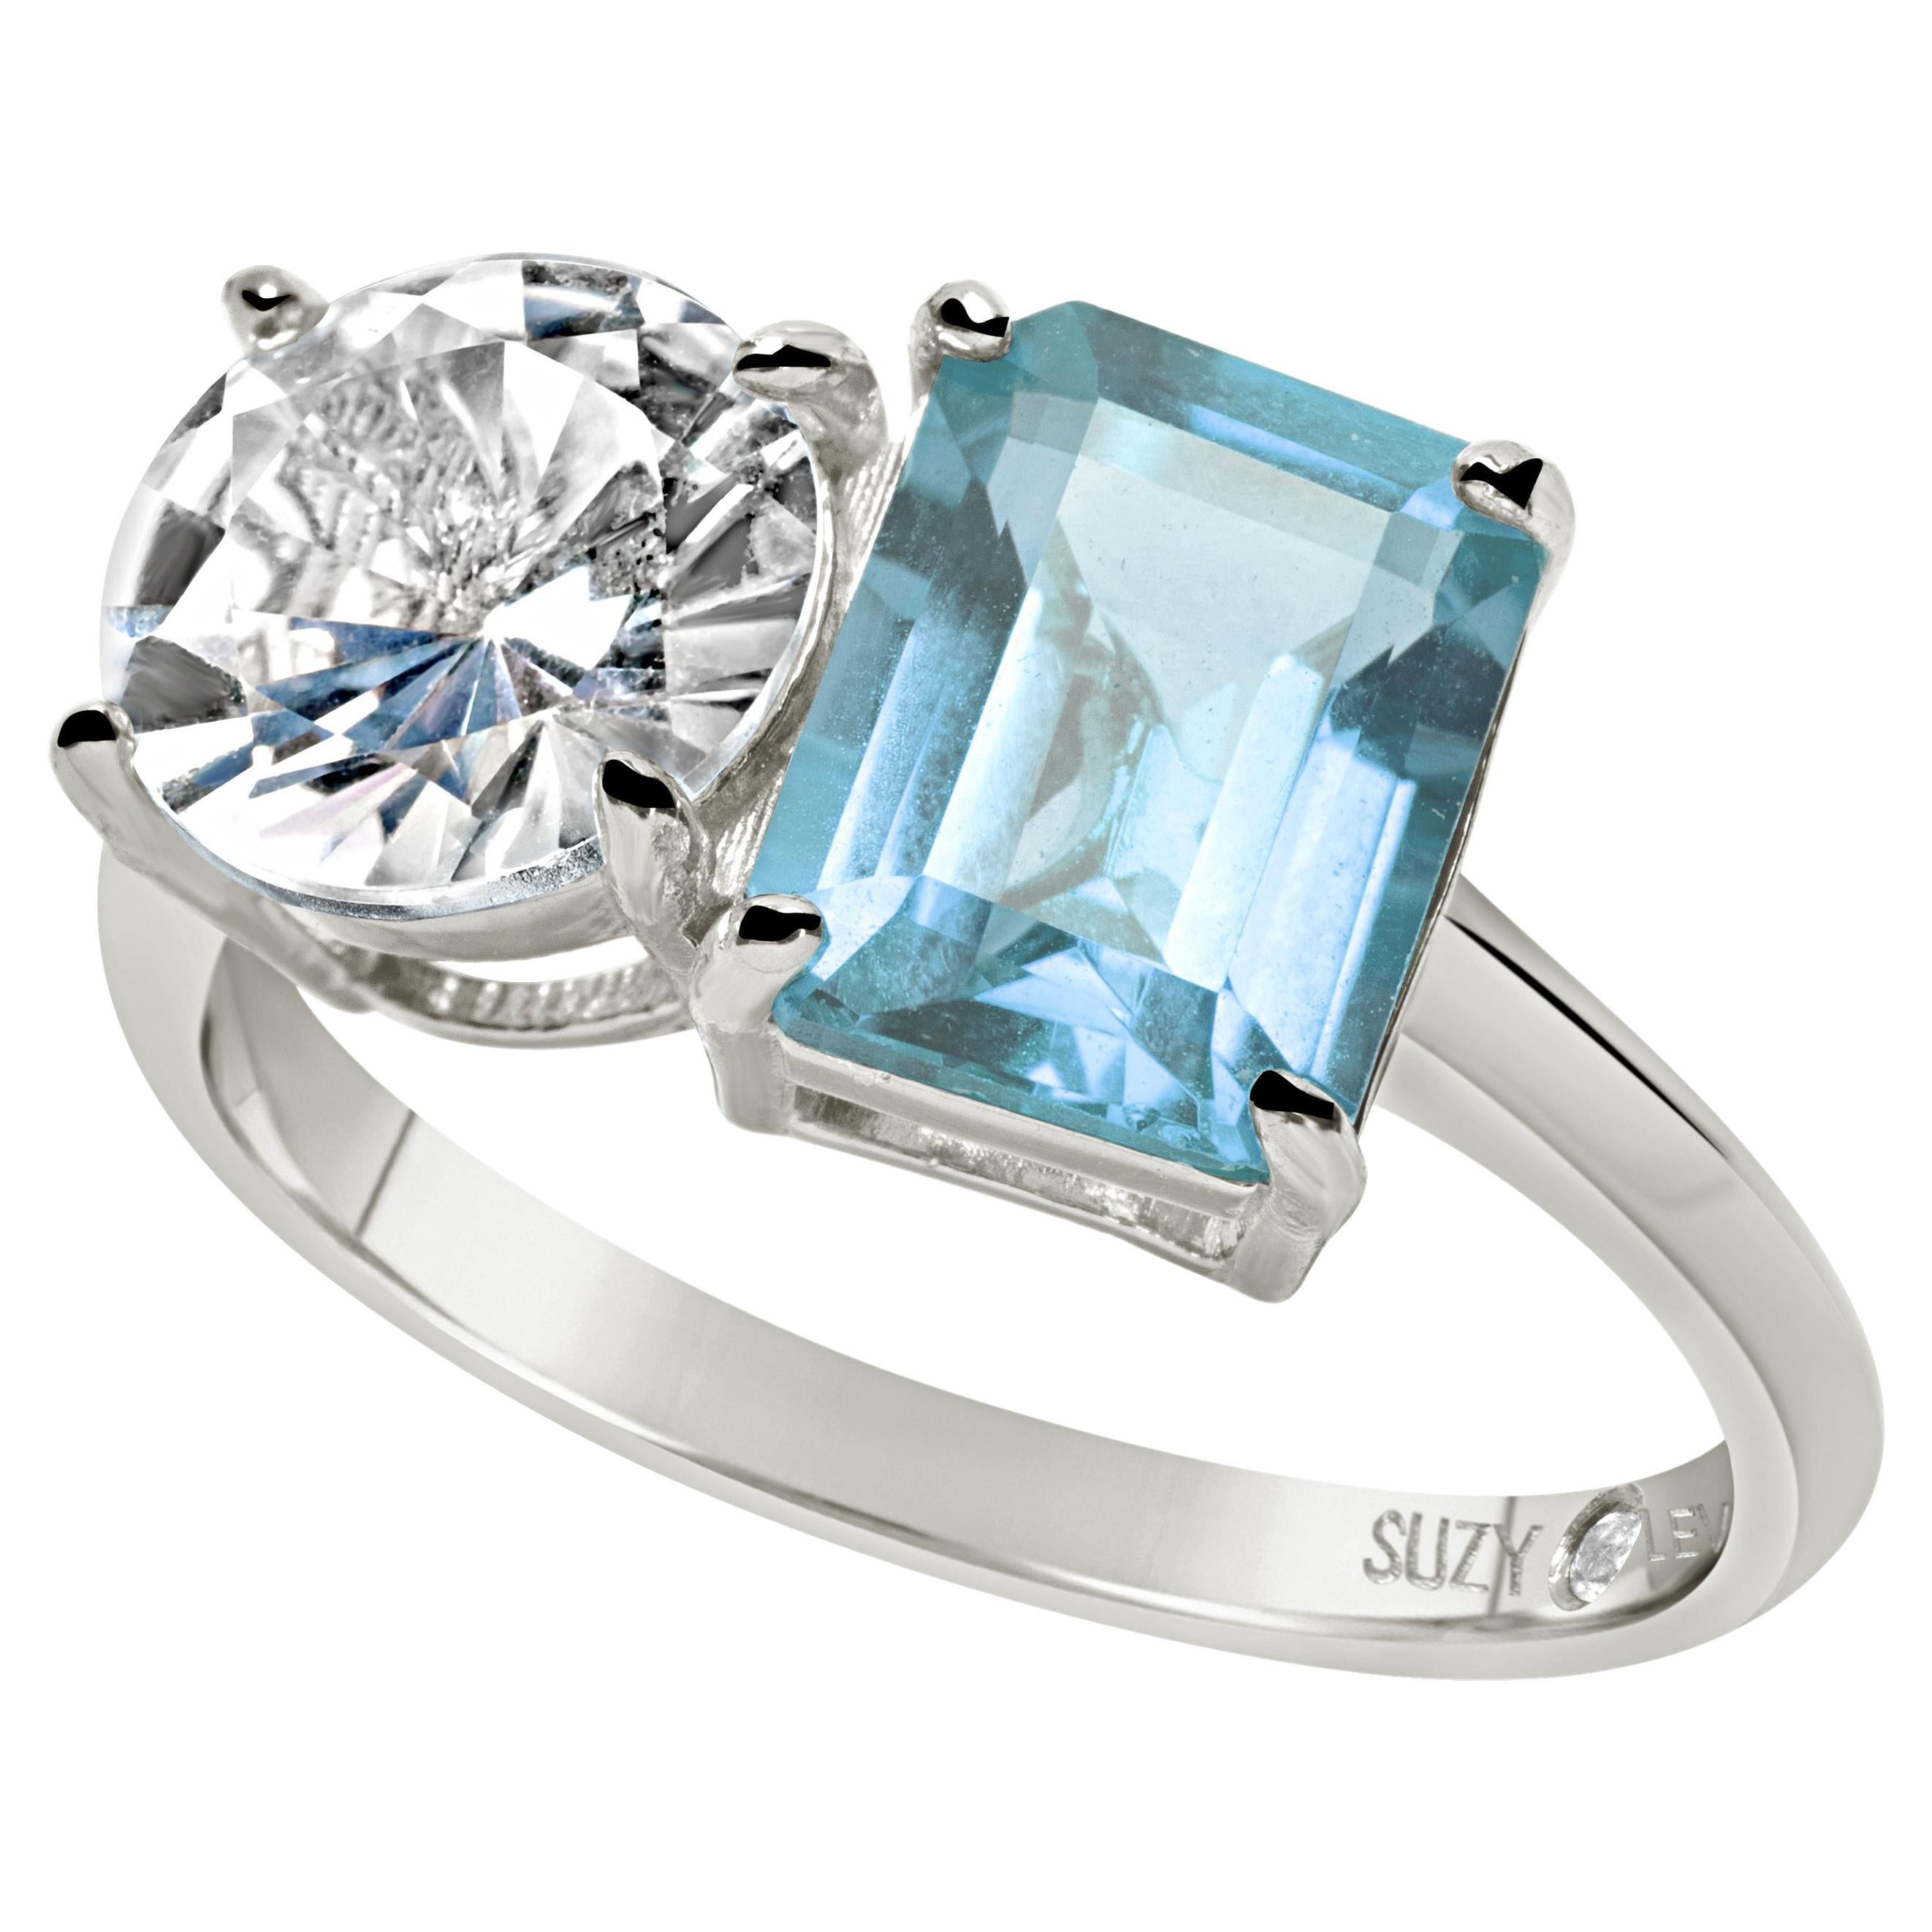 Suzy Levian Sterling Silver White Topaz & Blue Topaz Two Stone Ring For Sale